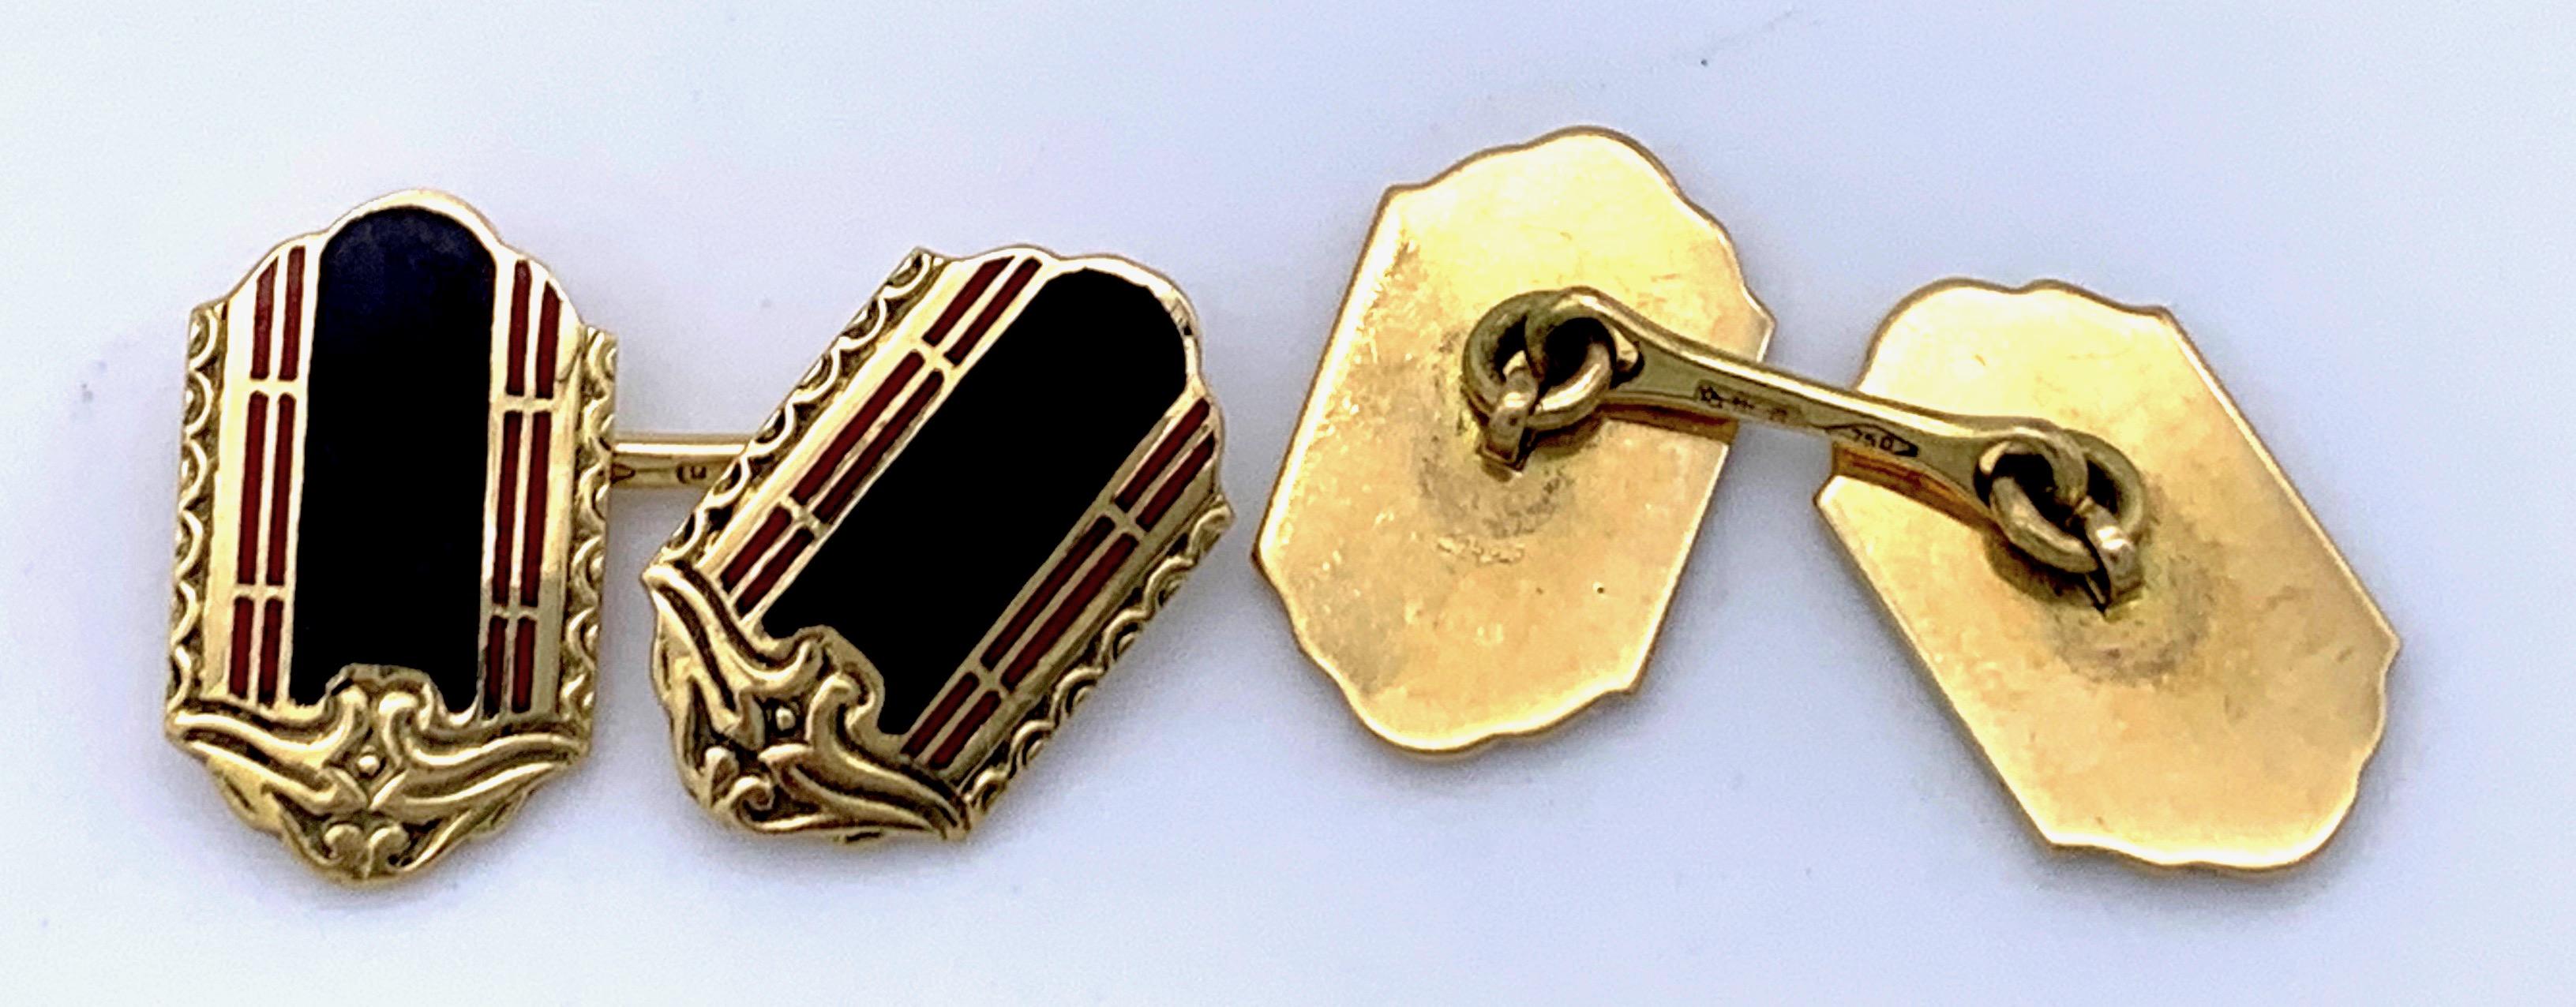 Highly attractive pair of  Art Deco cufflinks made out of 18k Gold. The cufflinks are decorated with red and black enamel and fine engraving.